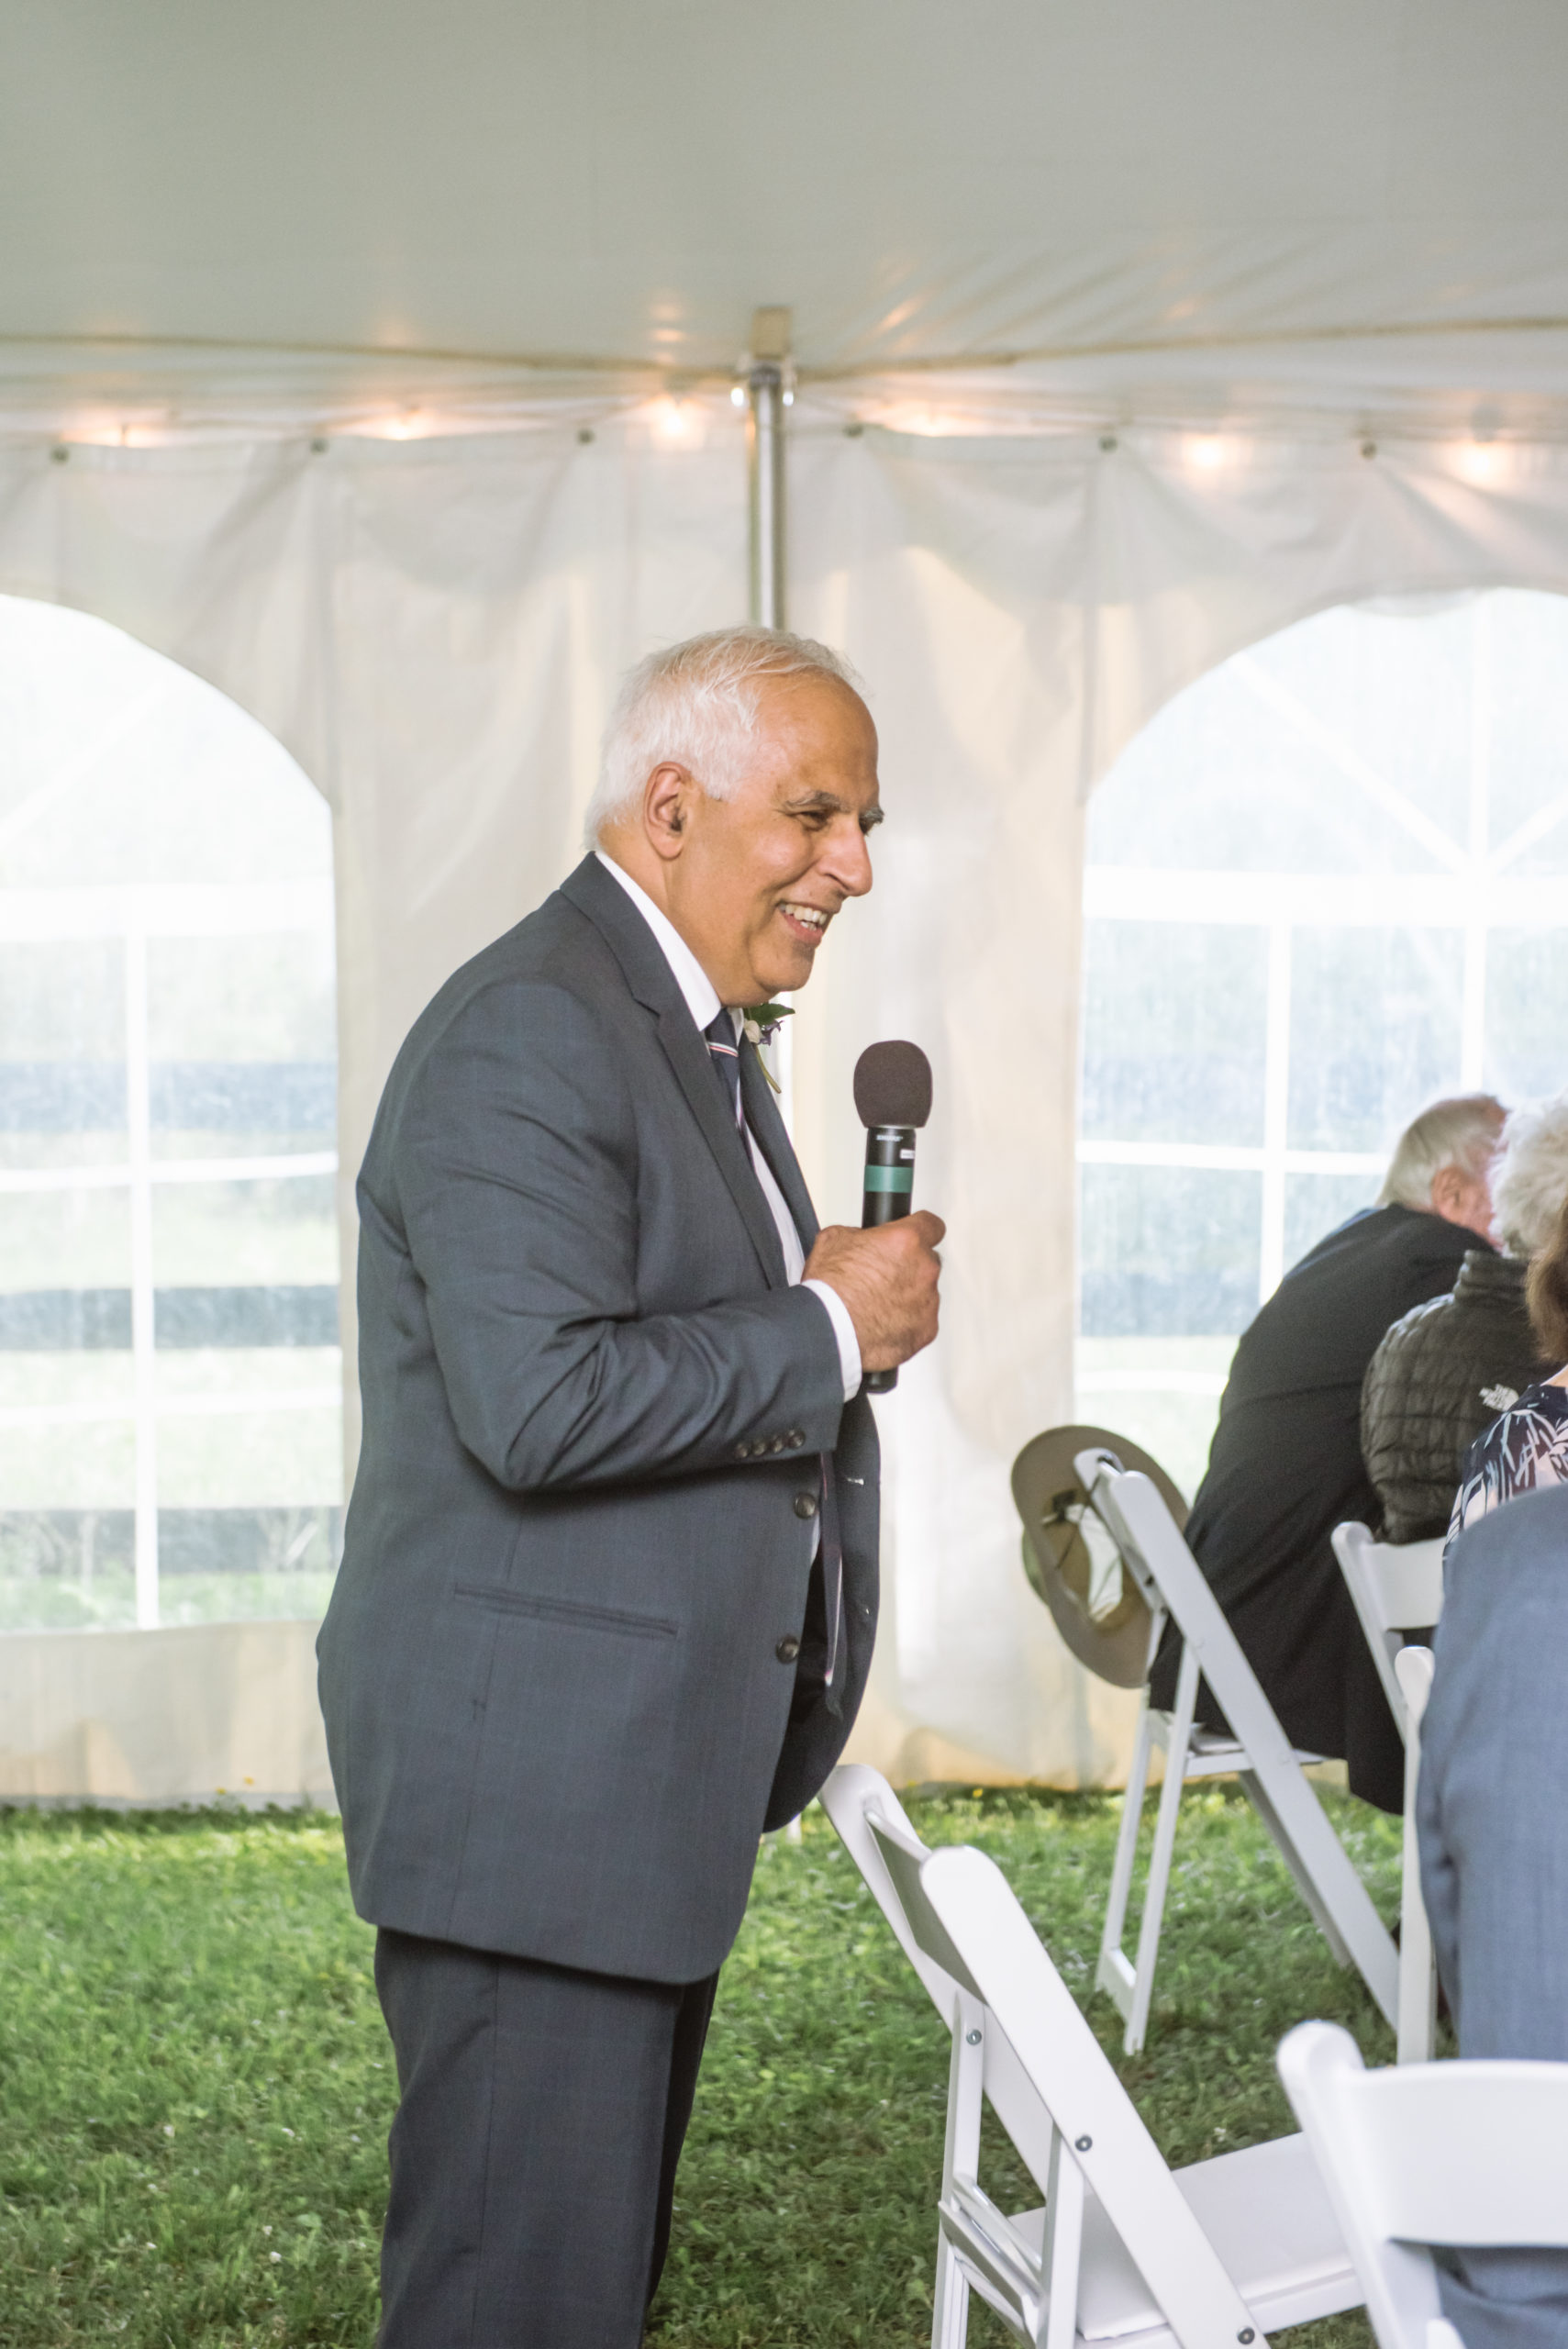 Father of the bride speaking into a microphone for a speech. He has a huge smile on his face and is standing behind a white chair in a white tent.